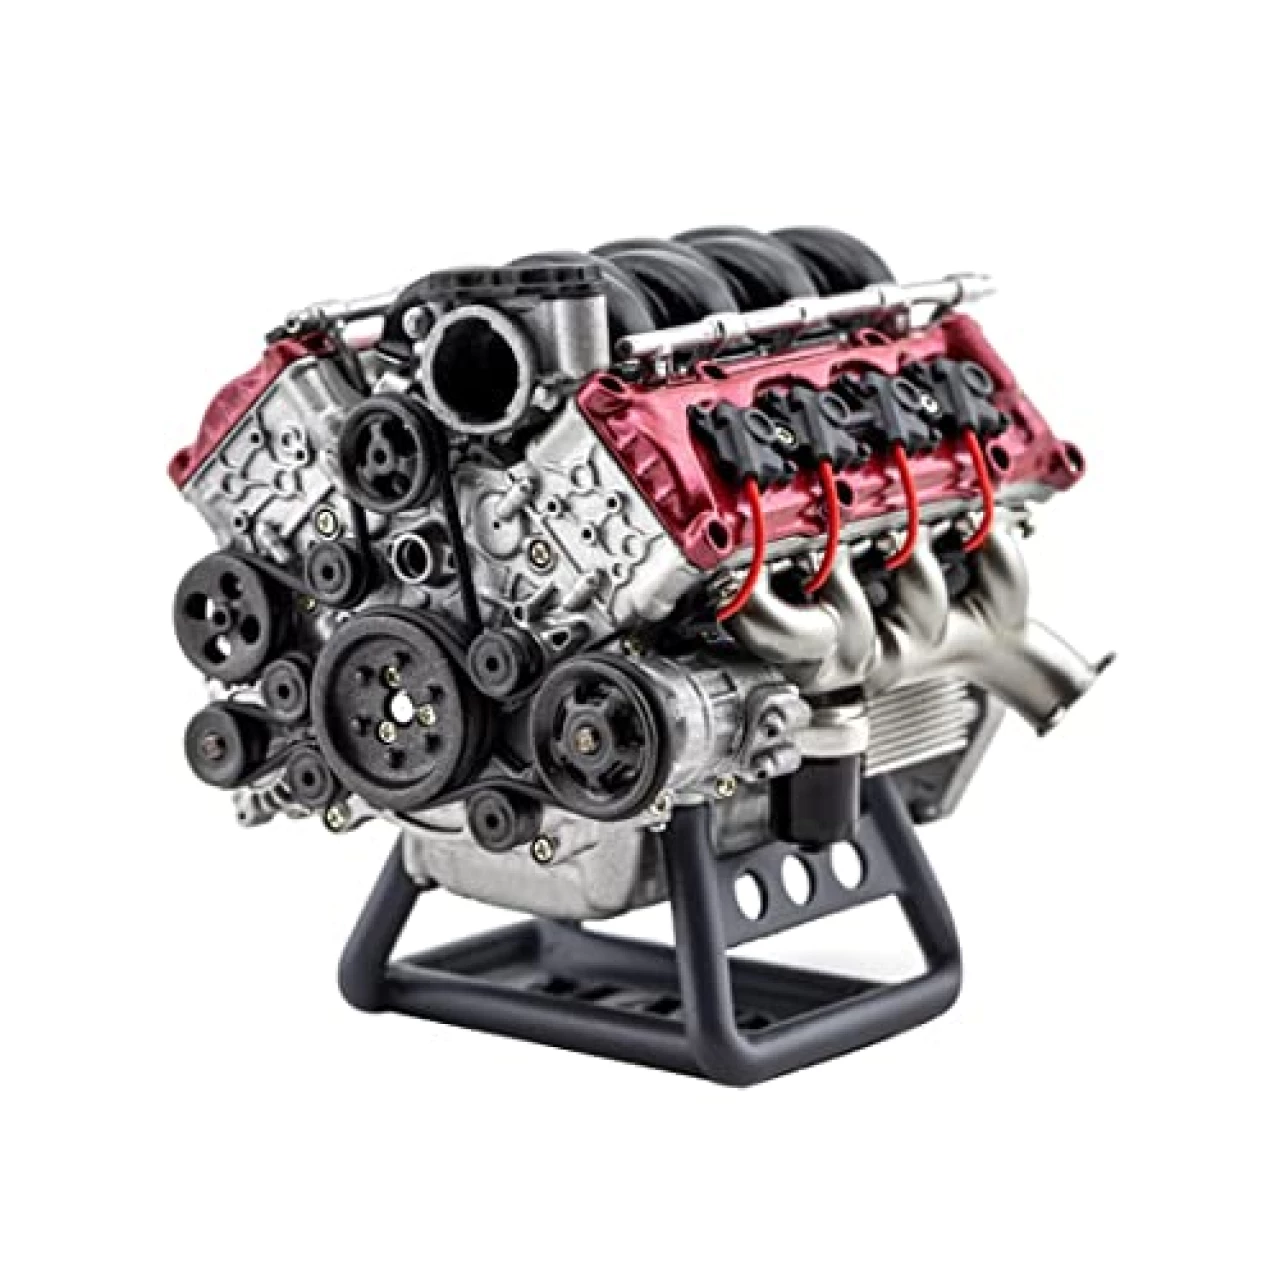 MINDEN RC Dynamic V8 Engine Model, Internal Combustion Engine Model, Physical Experiment Toys for Adults and Kids (KIT Version)